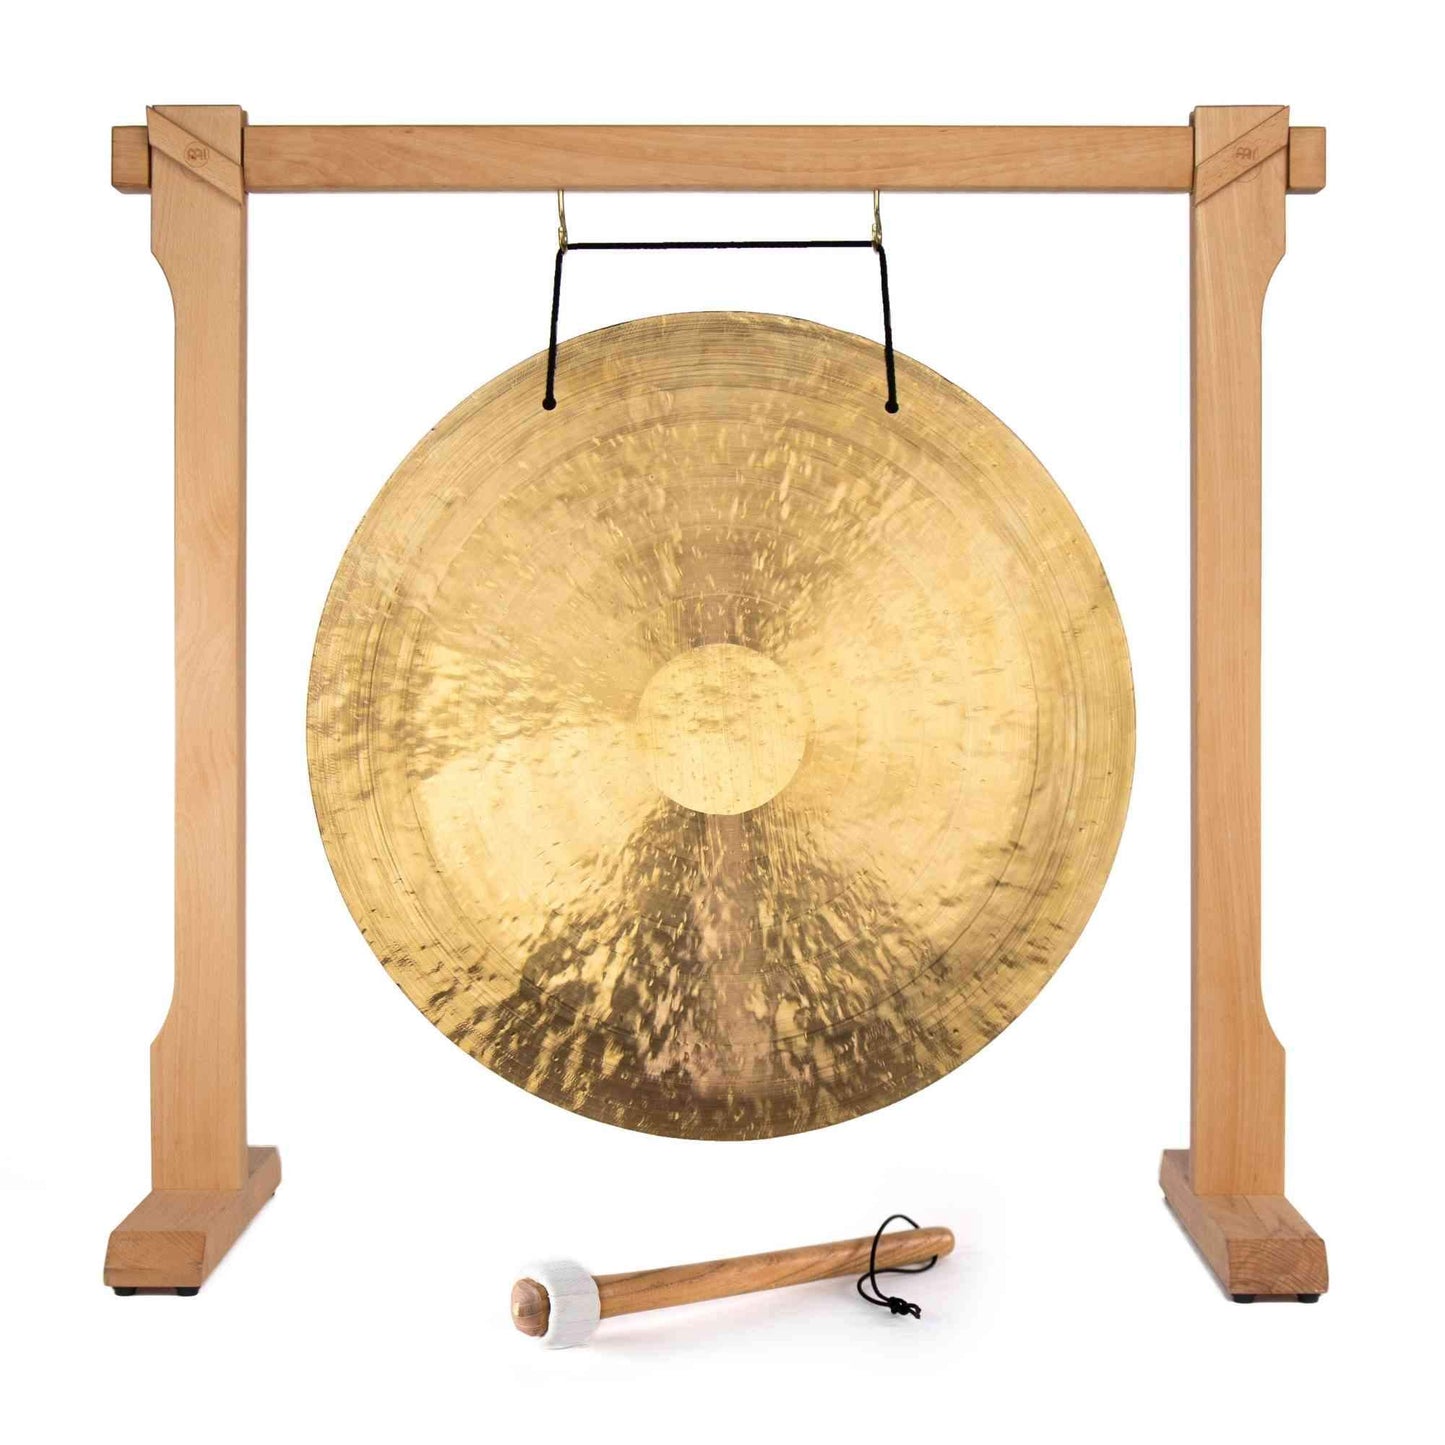 The Gong Shop Chinese Gongs with Stands 32" Chinese Wind Gong on Meinl Wooden Gong Stand with Mallet